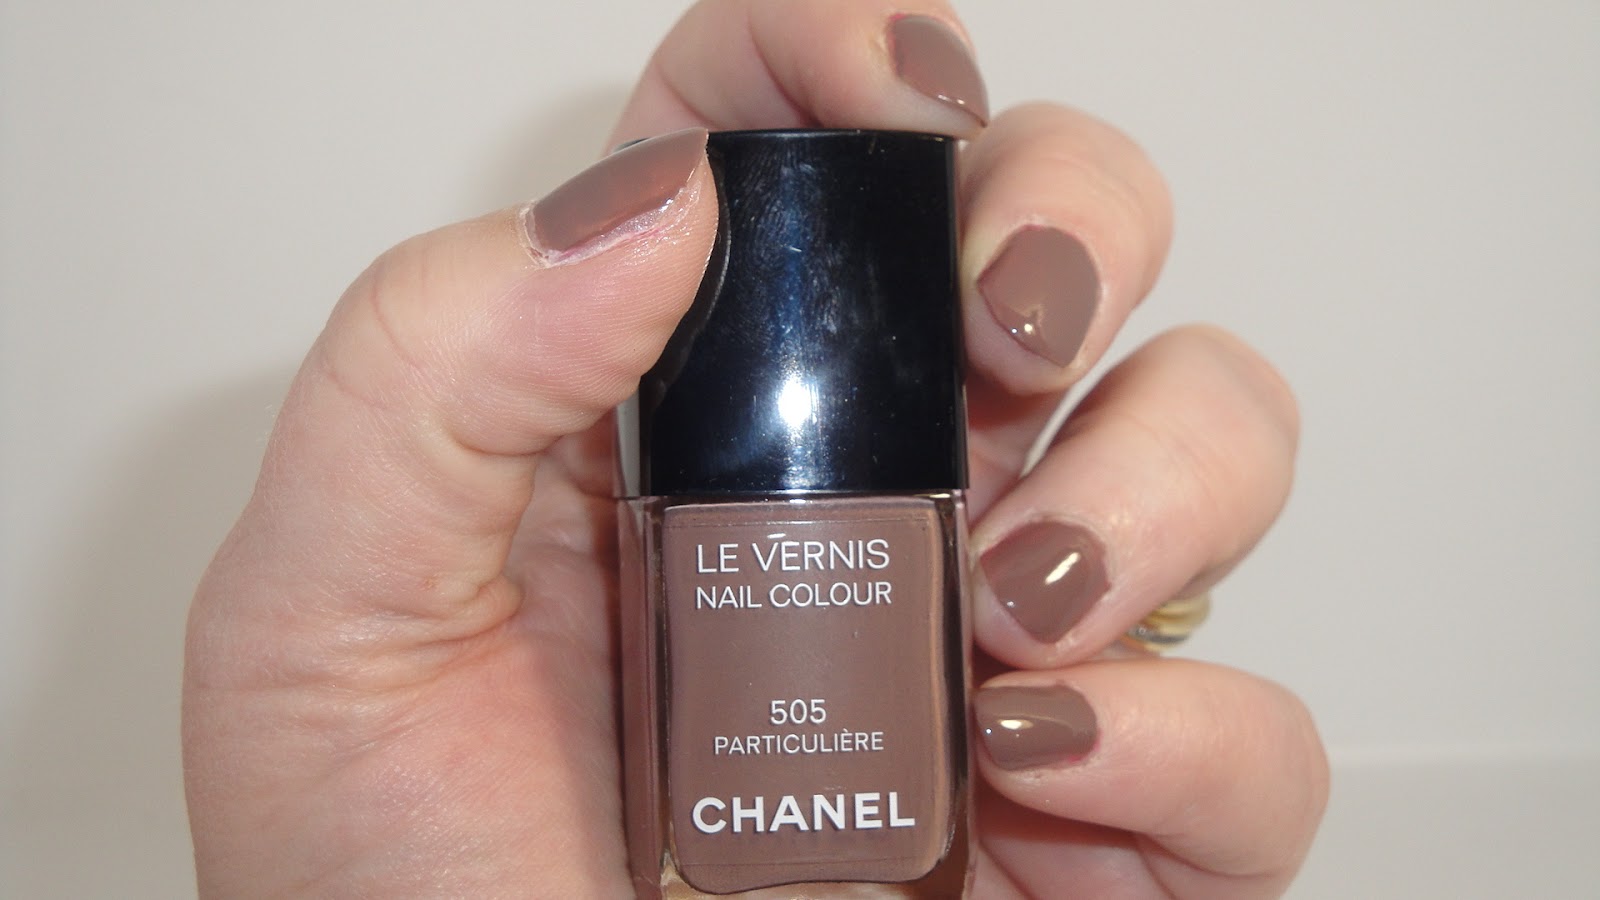 Chanel Le Vernis Longwear Nail Colour in Particuliere - wide 4